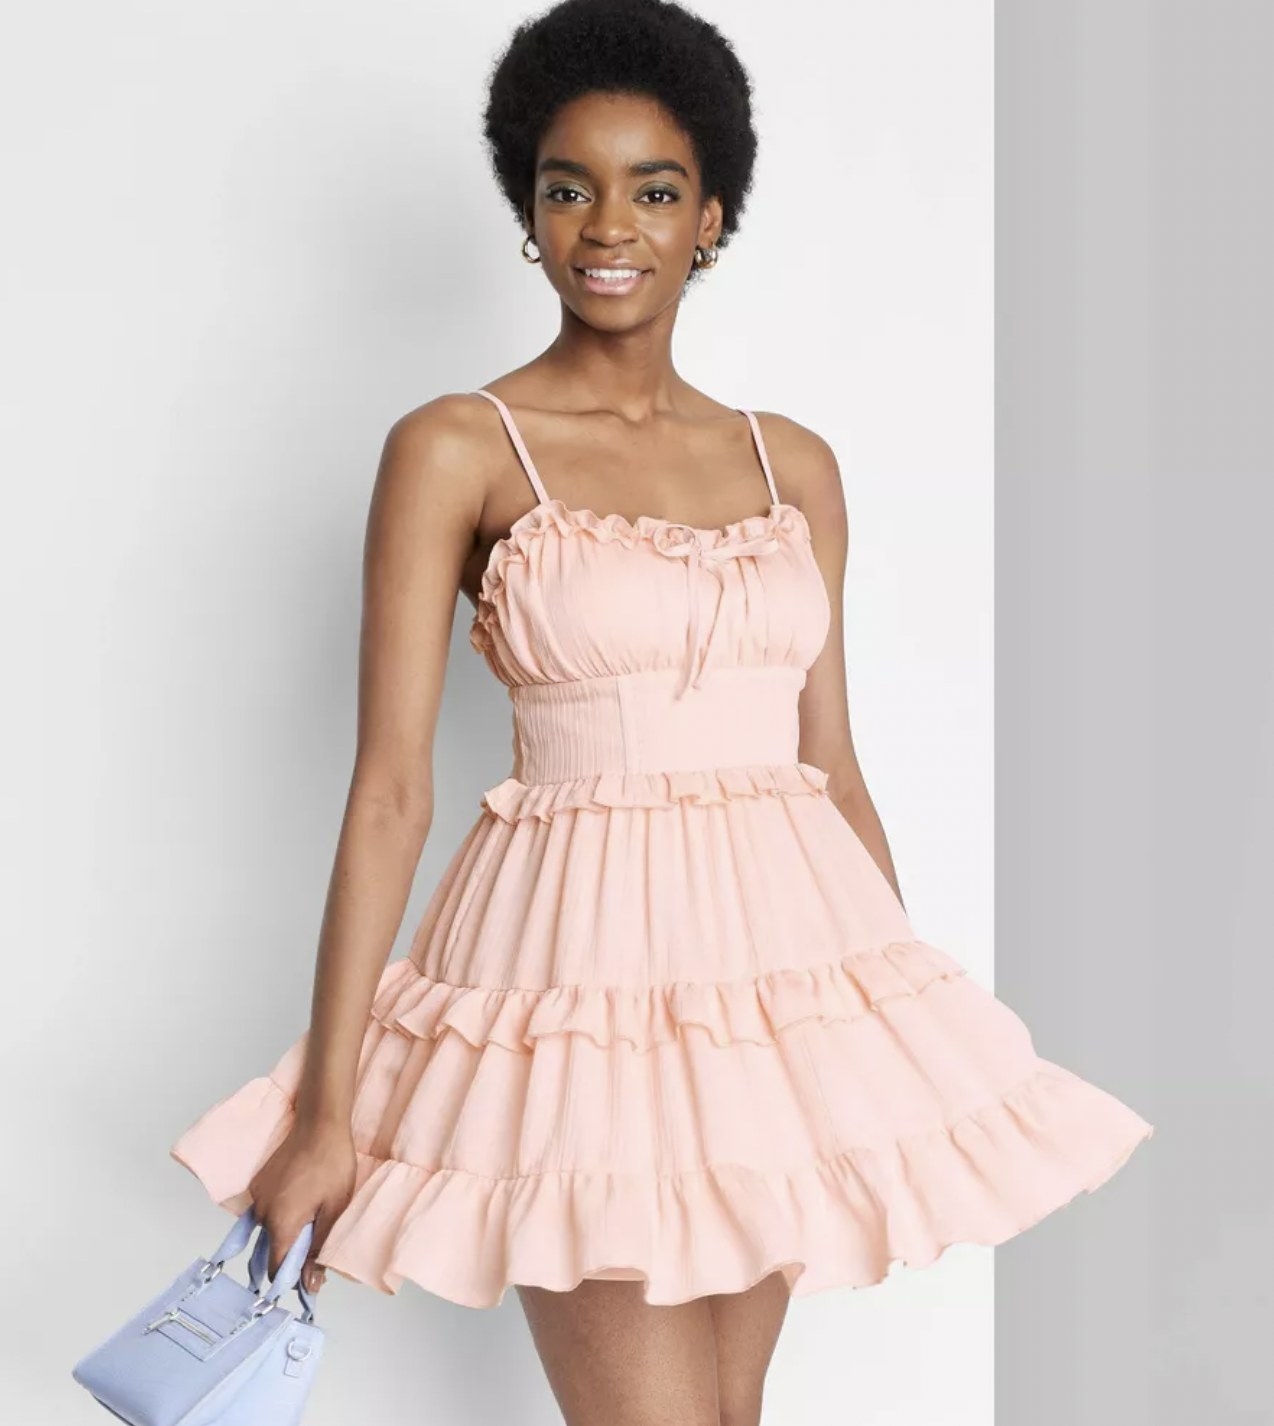 a model wearing the dress in pink